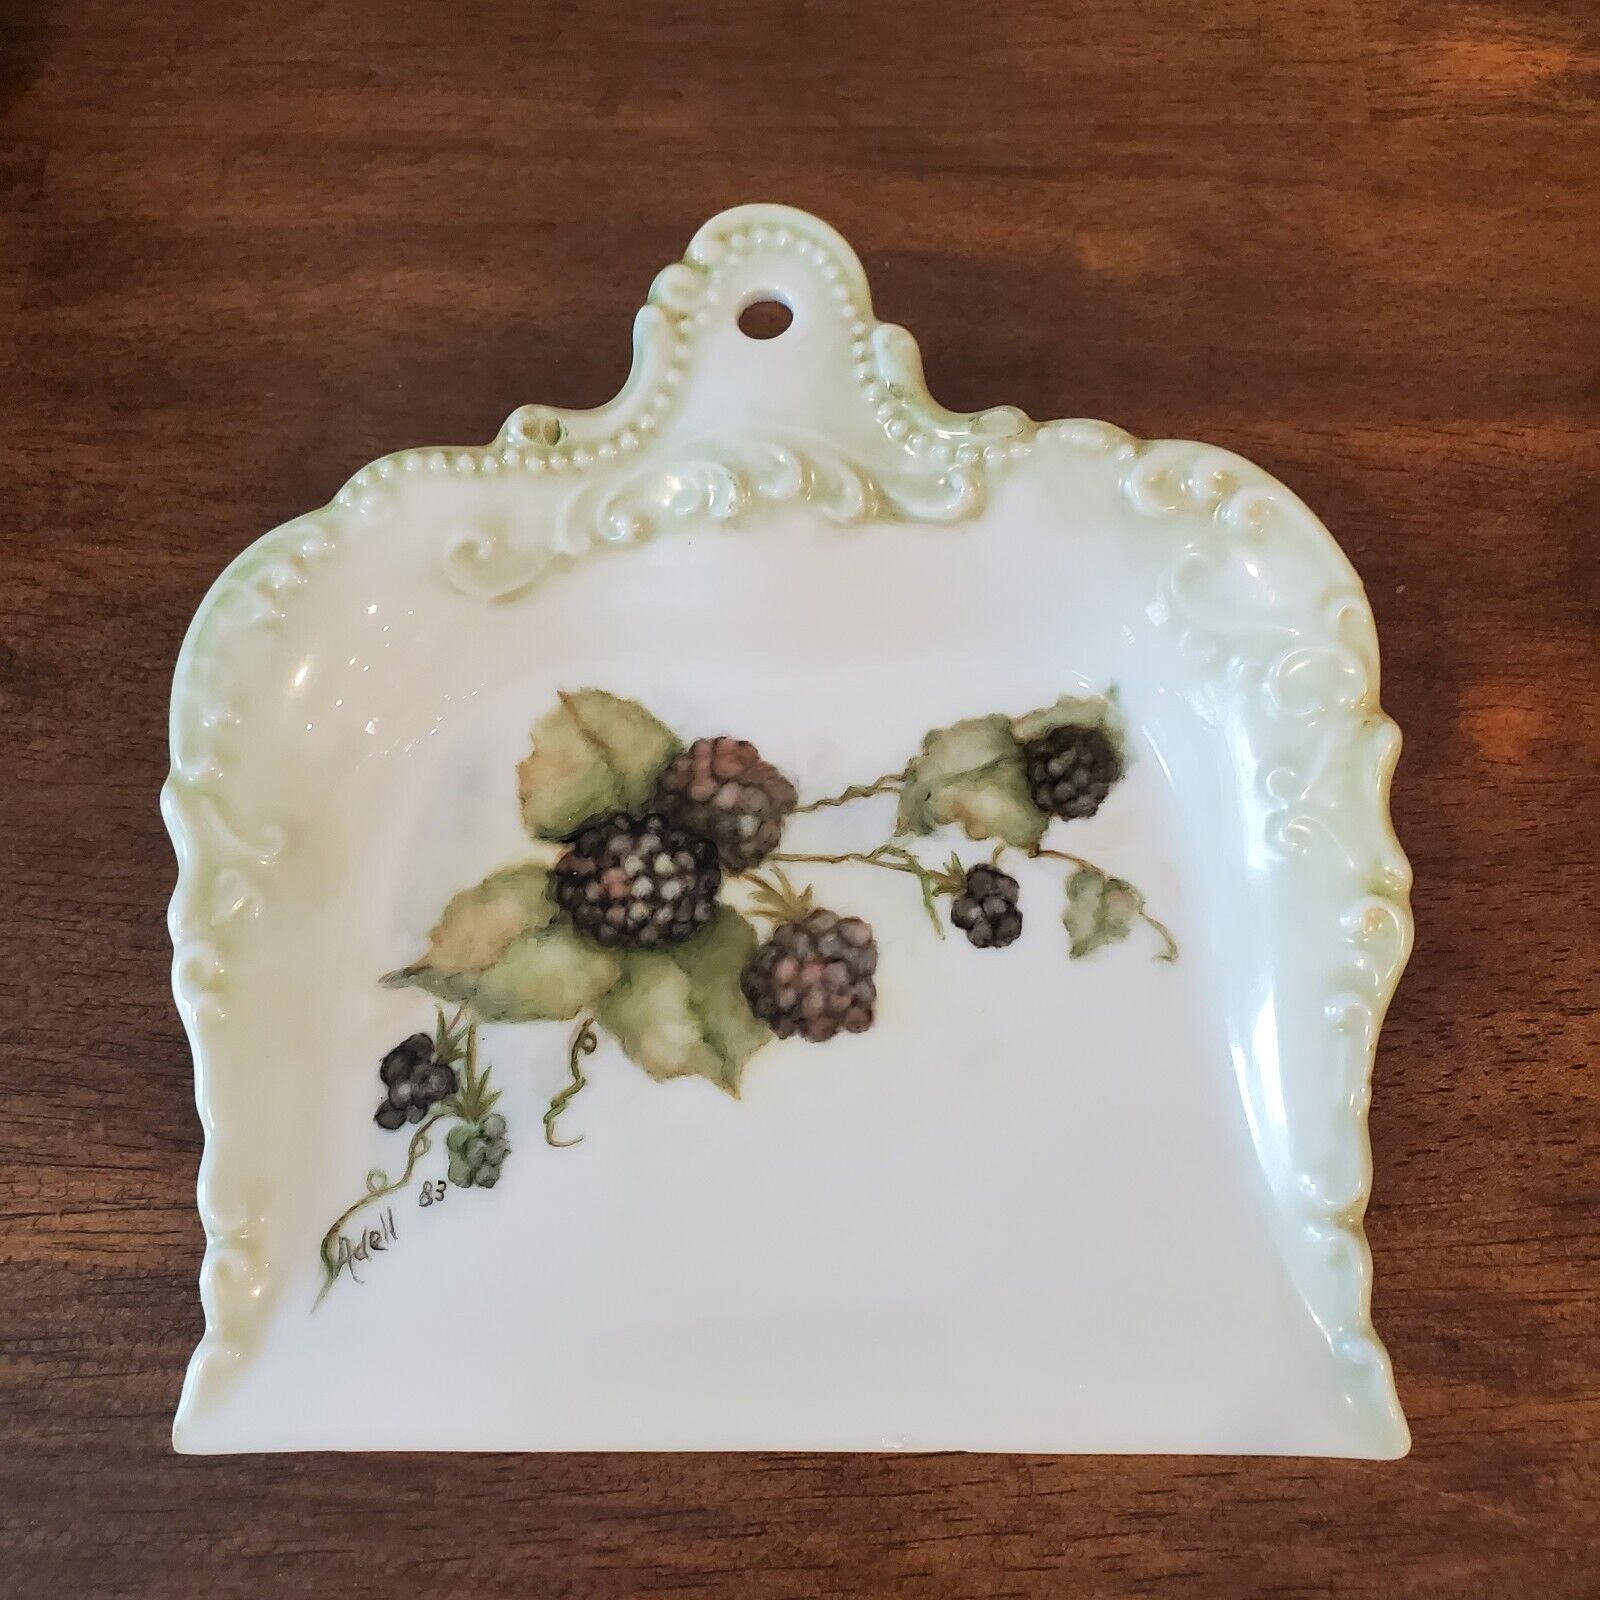 VTG Porcelain 6x6 Crumb Tray Dustpan Wall Hanging Handpainted Floral Adell 83 